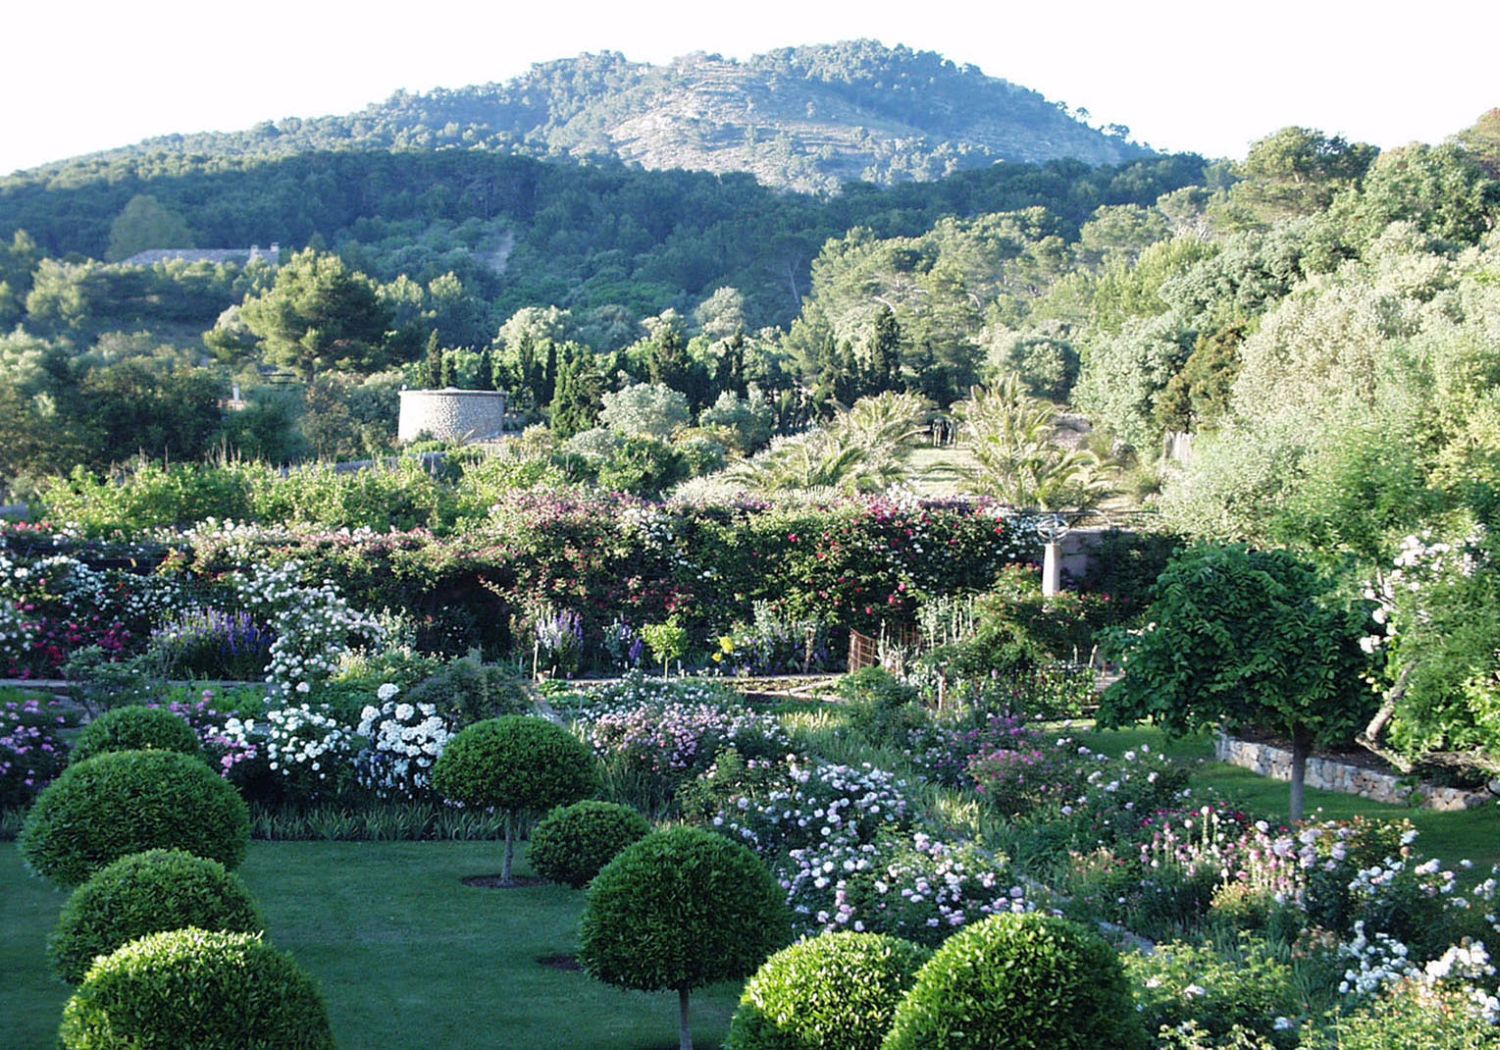 Sa Bassa Blanca - The rose garden and hill located on the north side of Sa Bassa Blanca